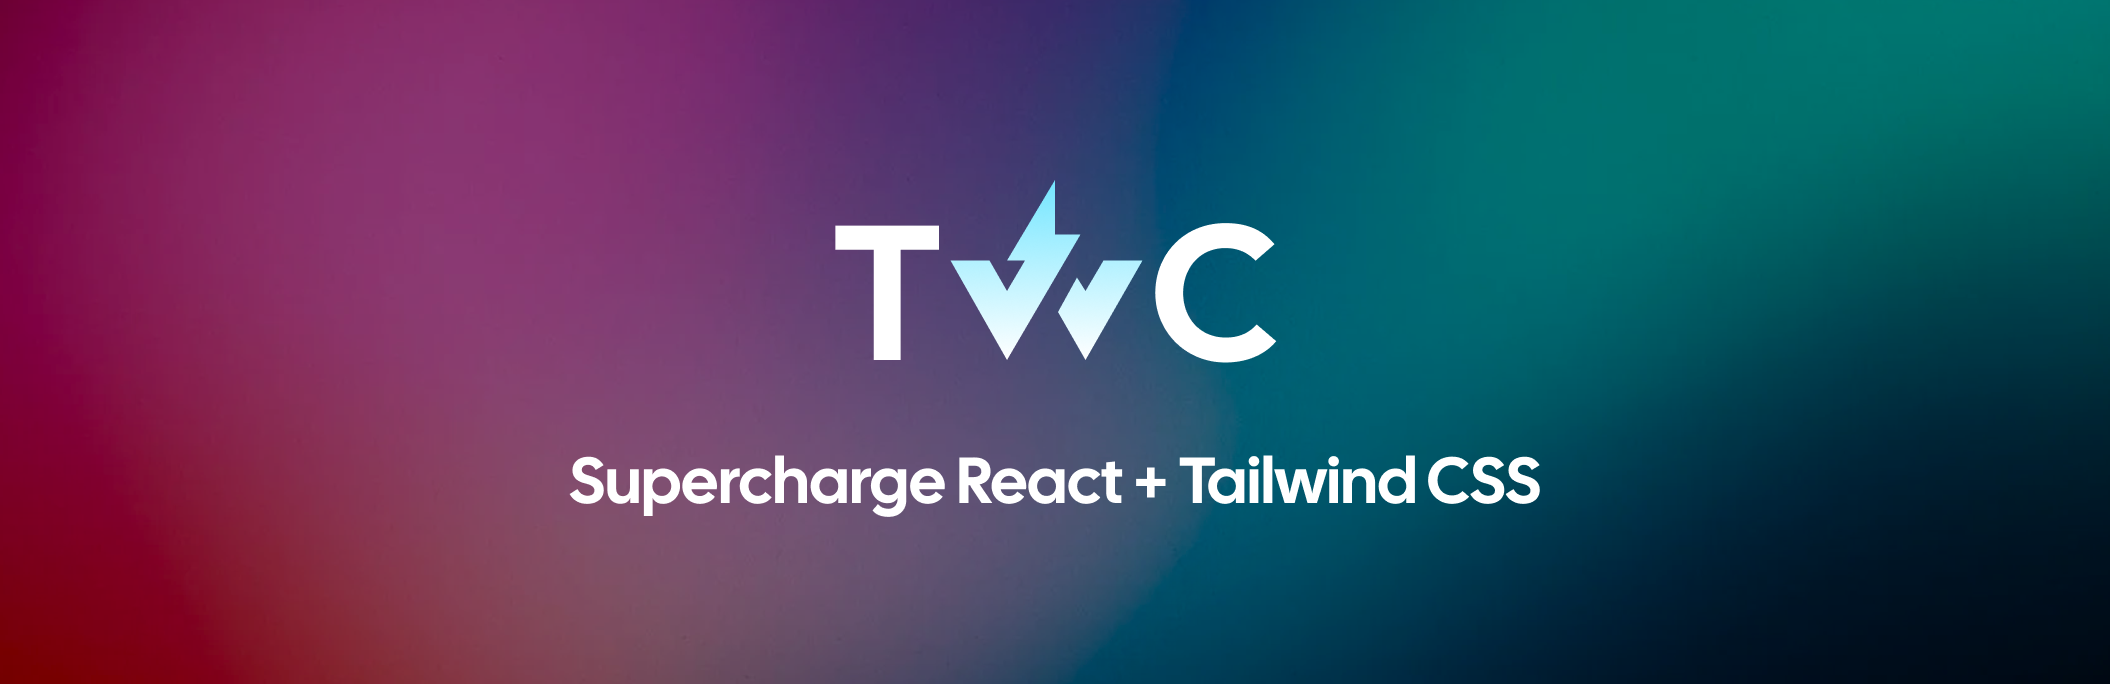 TWC library banner